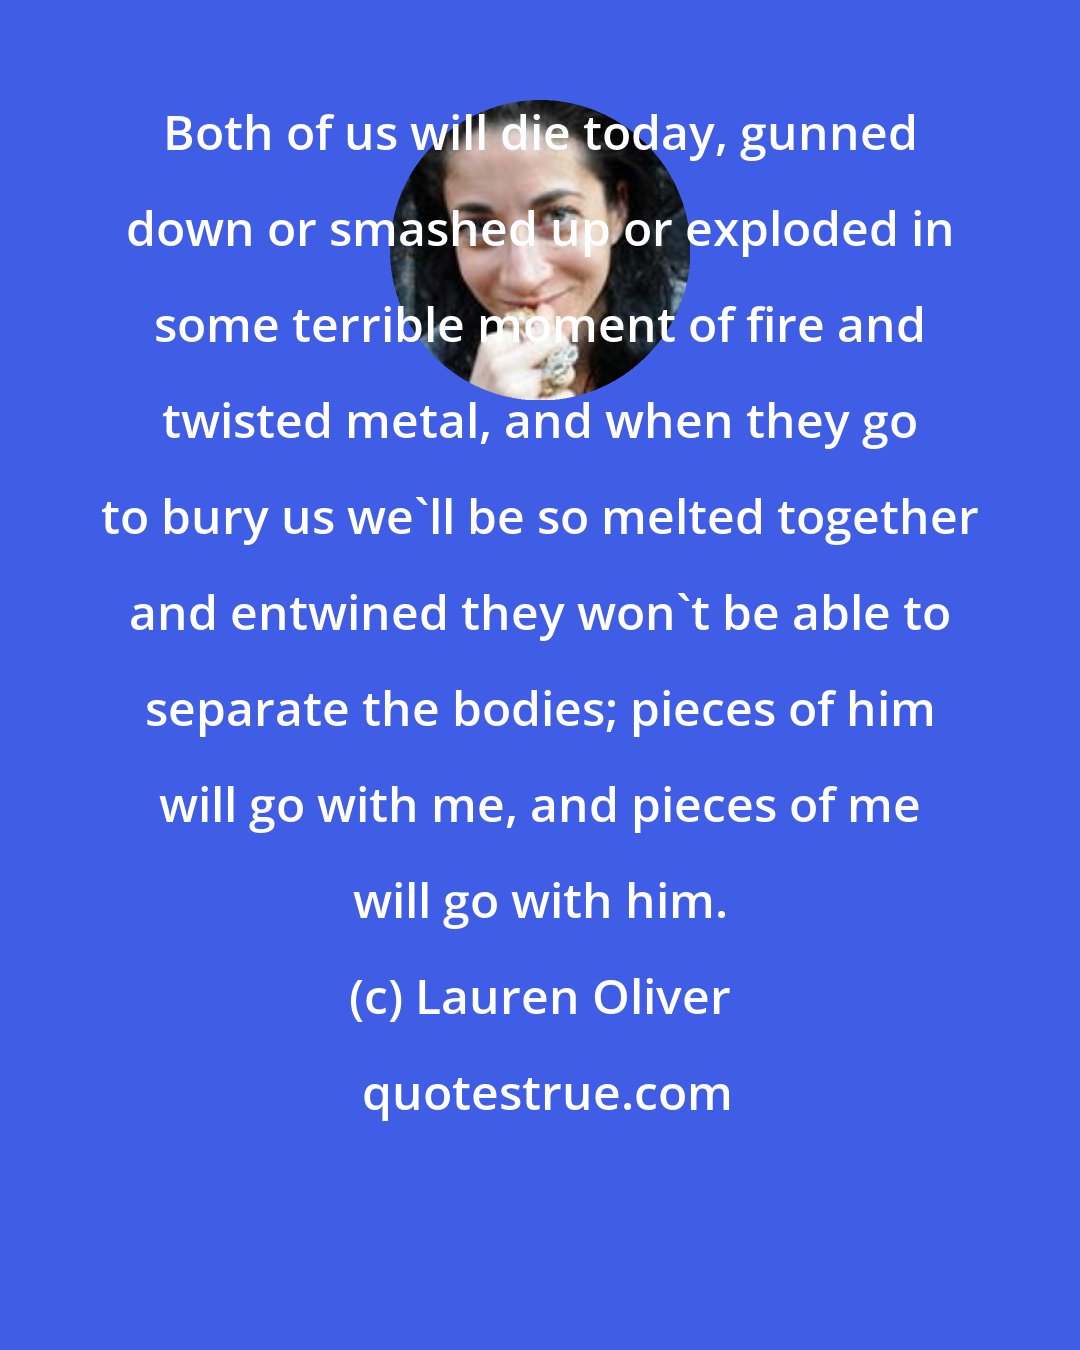 Lauren Oliver: Both of us will die today, gunned down or smashed up or exploded in some terrible moment of fire and twisted metal, and when they go to bury us we'll be so melted together and entwined they won't be able to separate the bodies; pieces of him will go with me, and pieces of me will go with him.